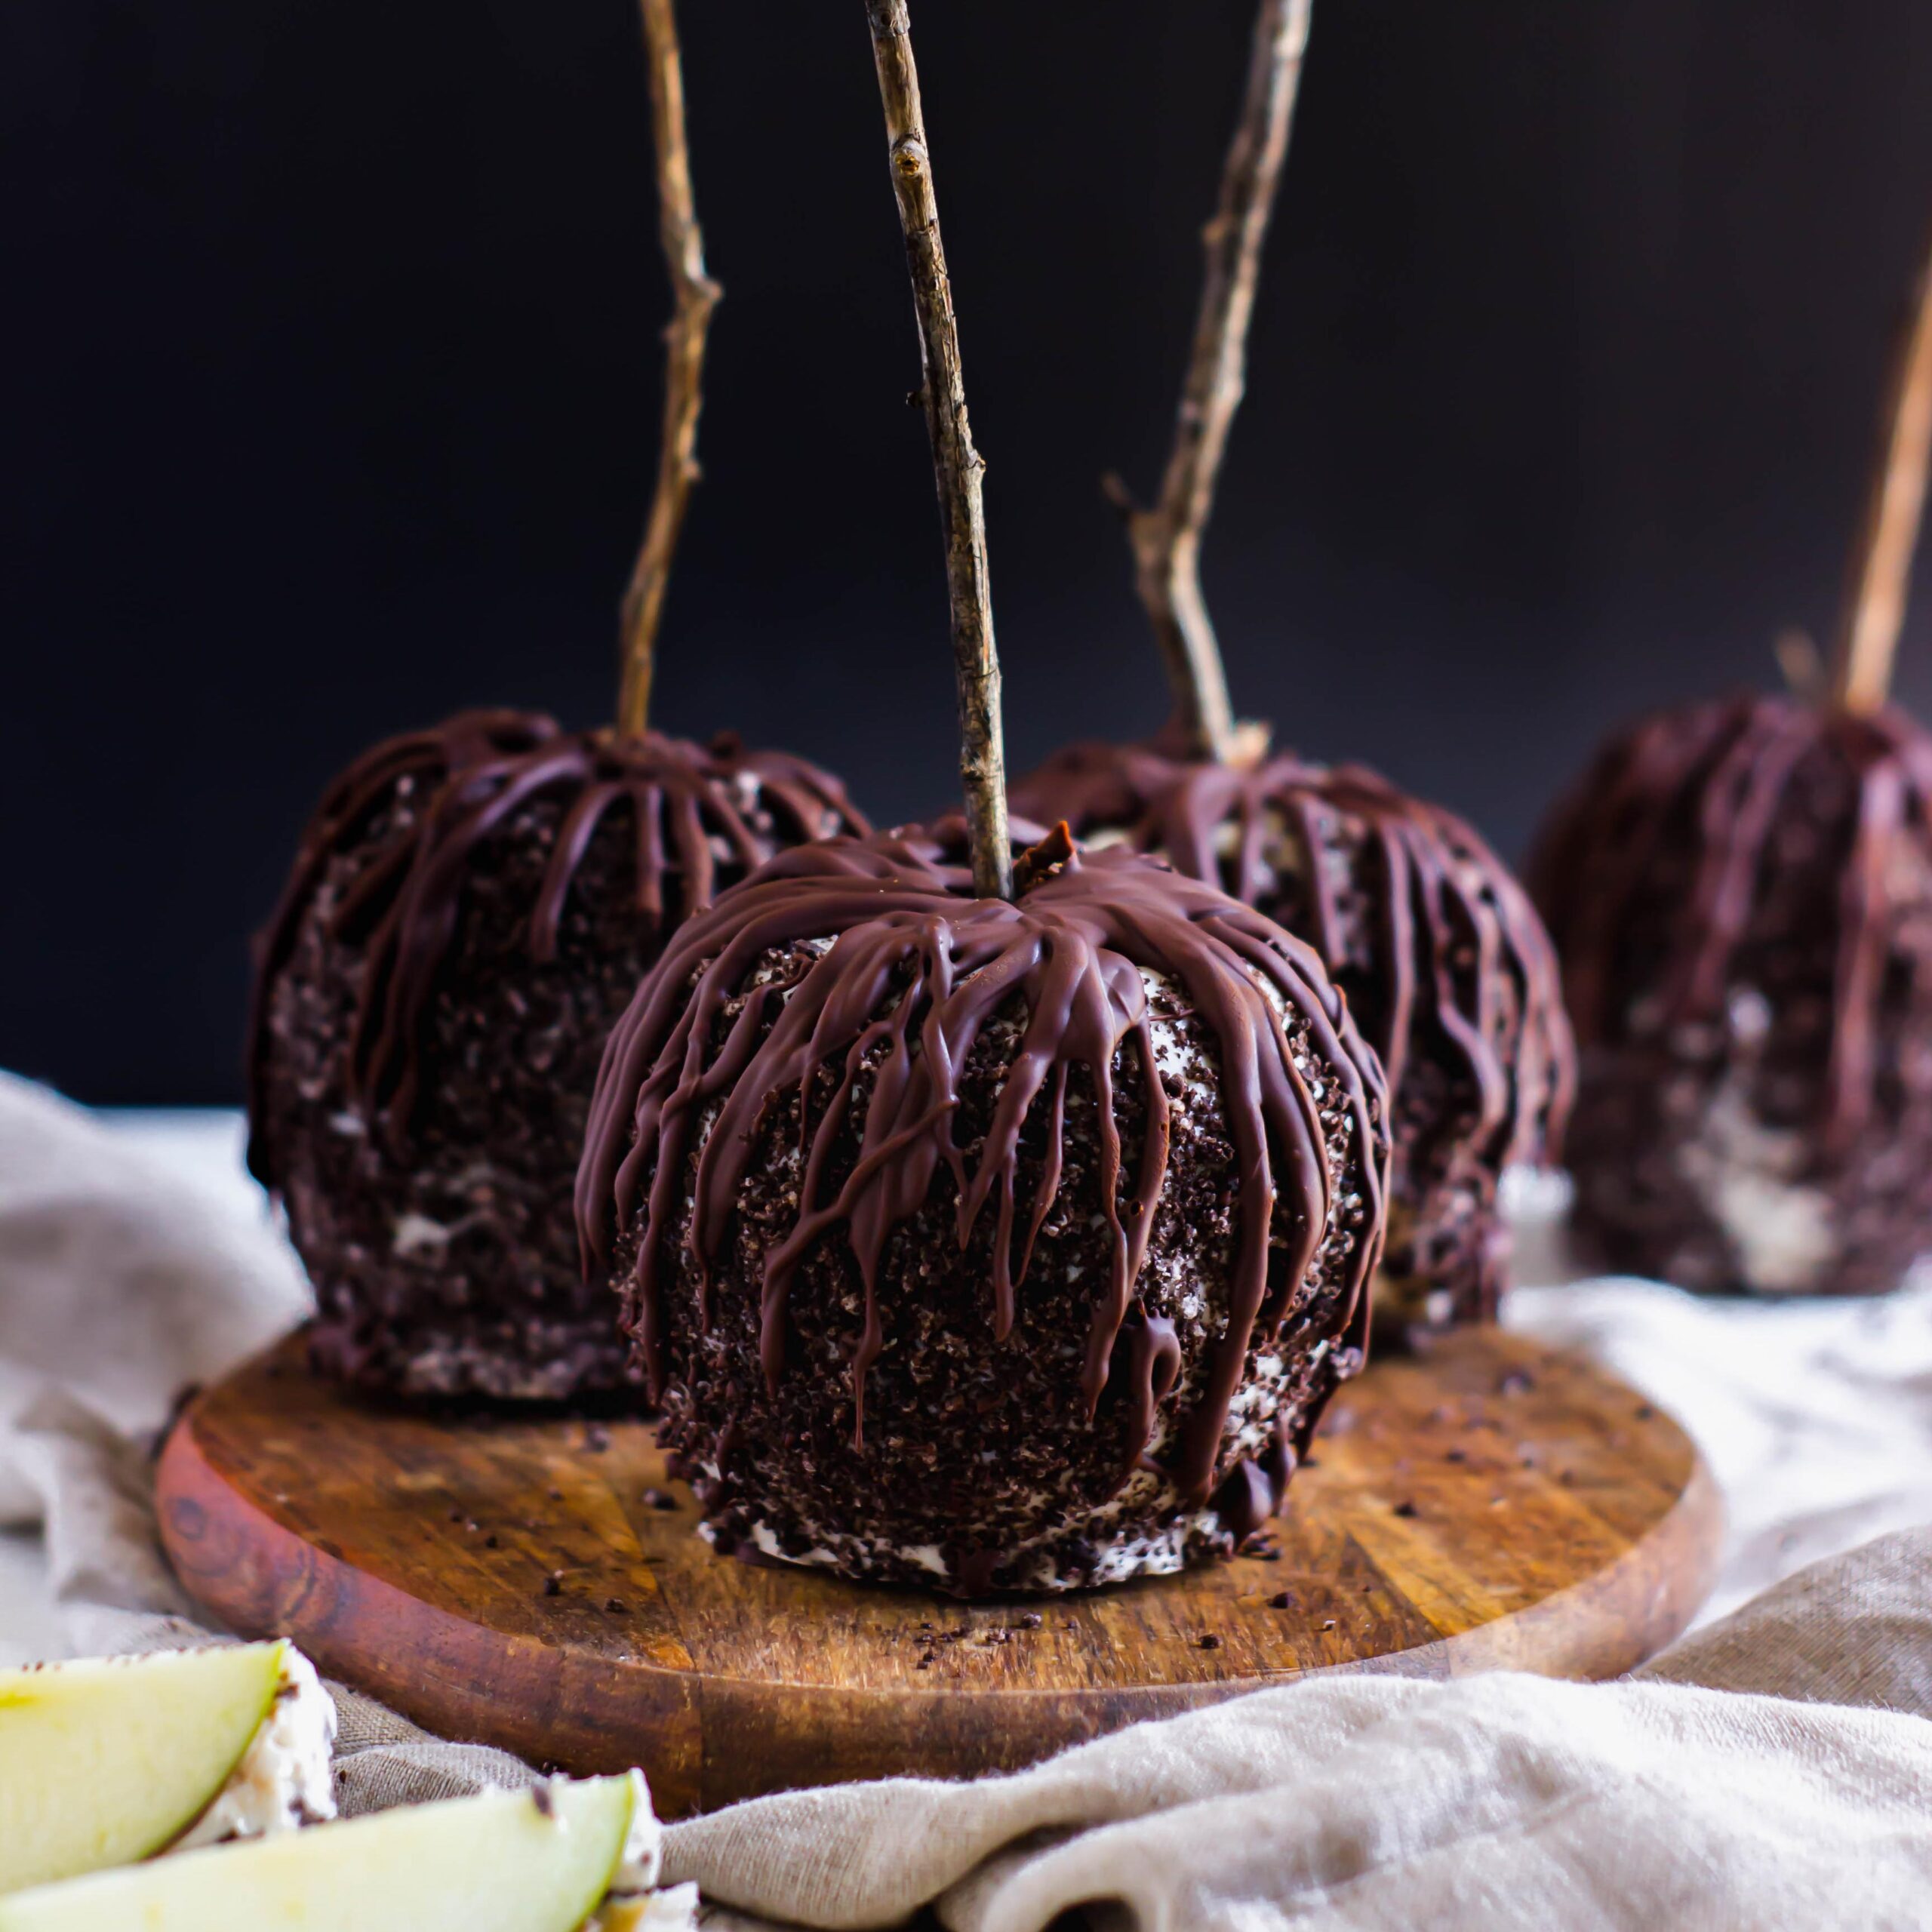  Treat yourself to these delicious caramel apples without any gluten or dairy!